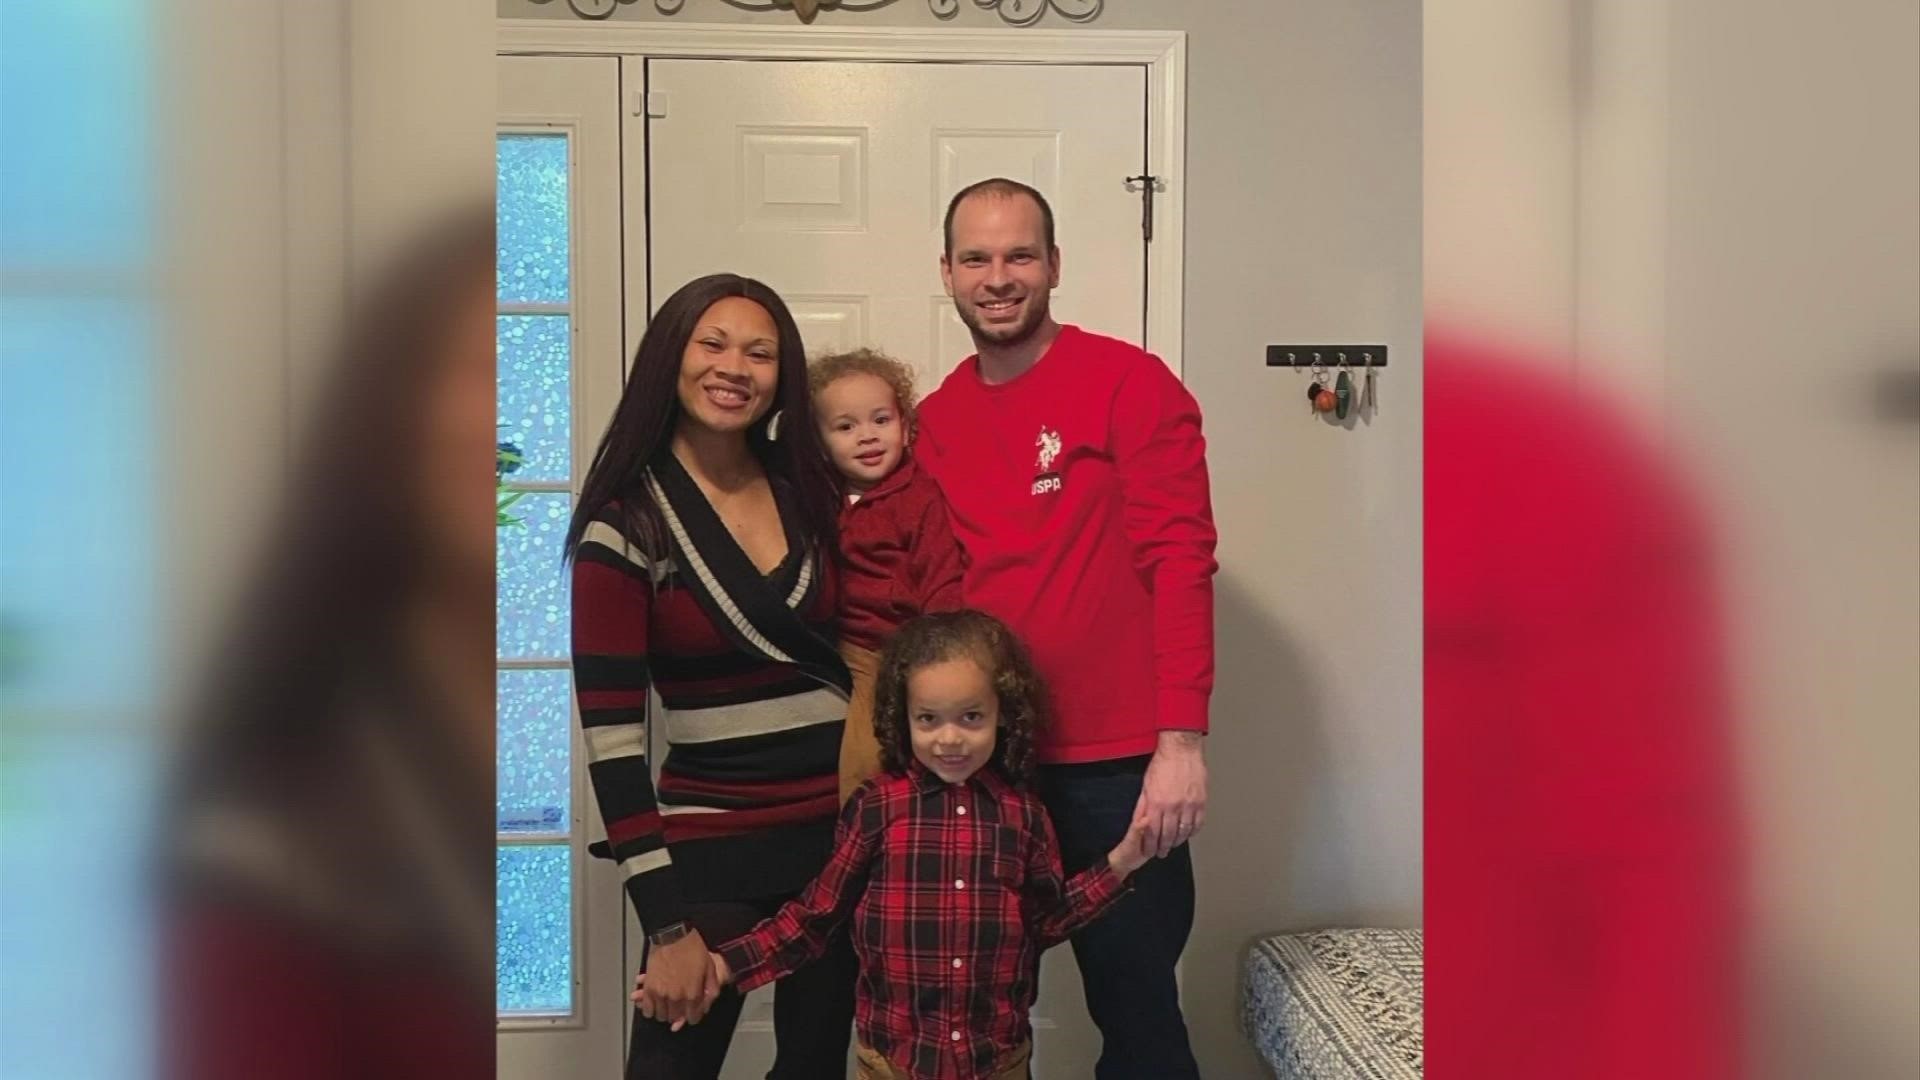 The parents, Kiara and Joseph Anderson, and their two young boys, Jeffery and Joseph Jr., were found dead inside their home Wednesday morning.